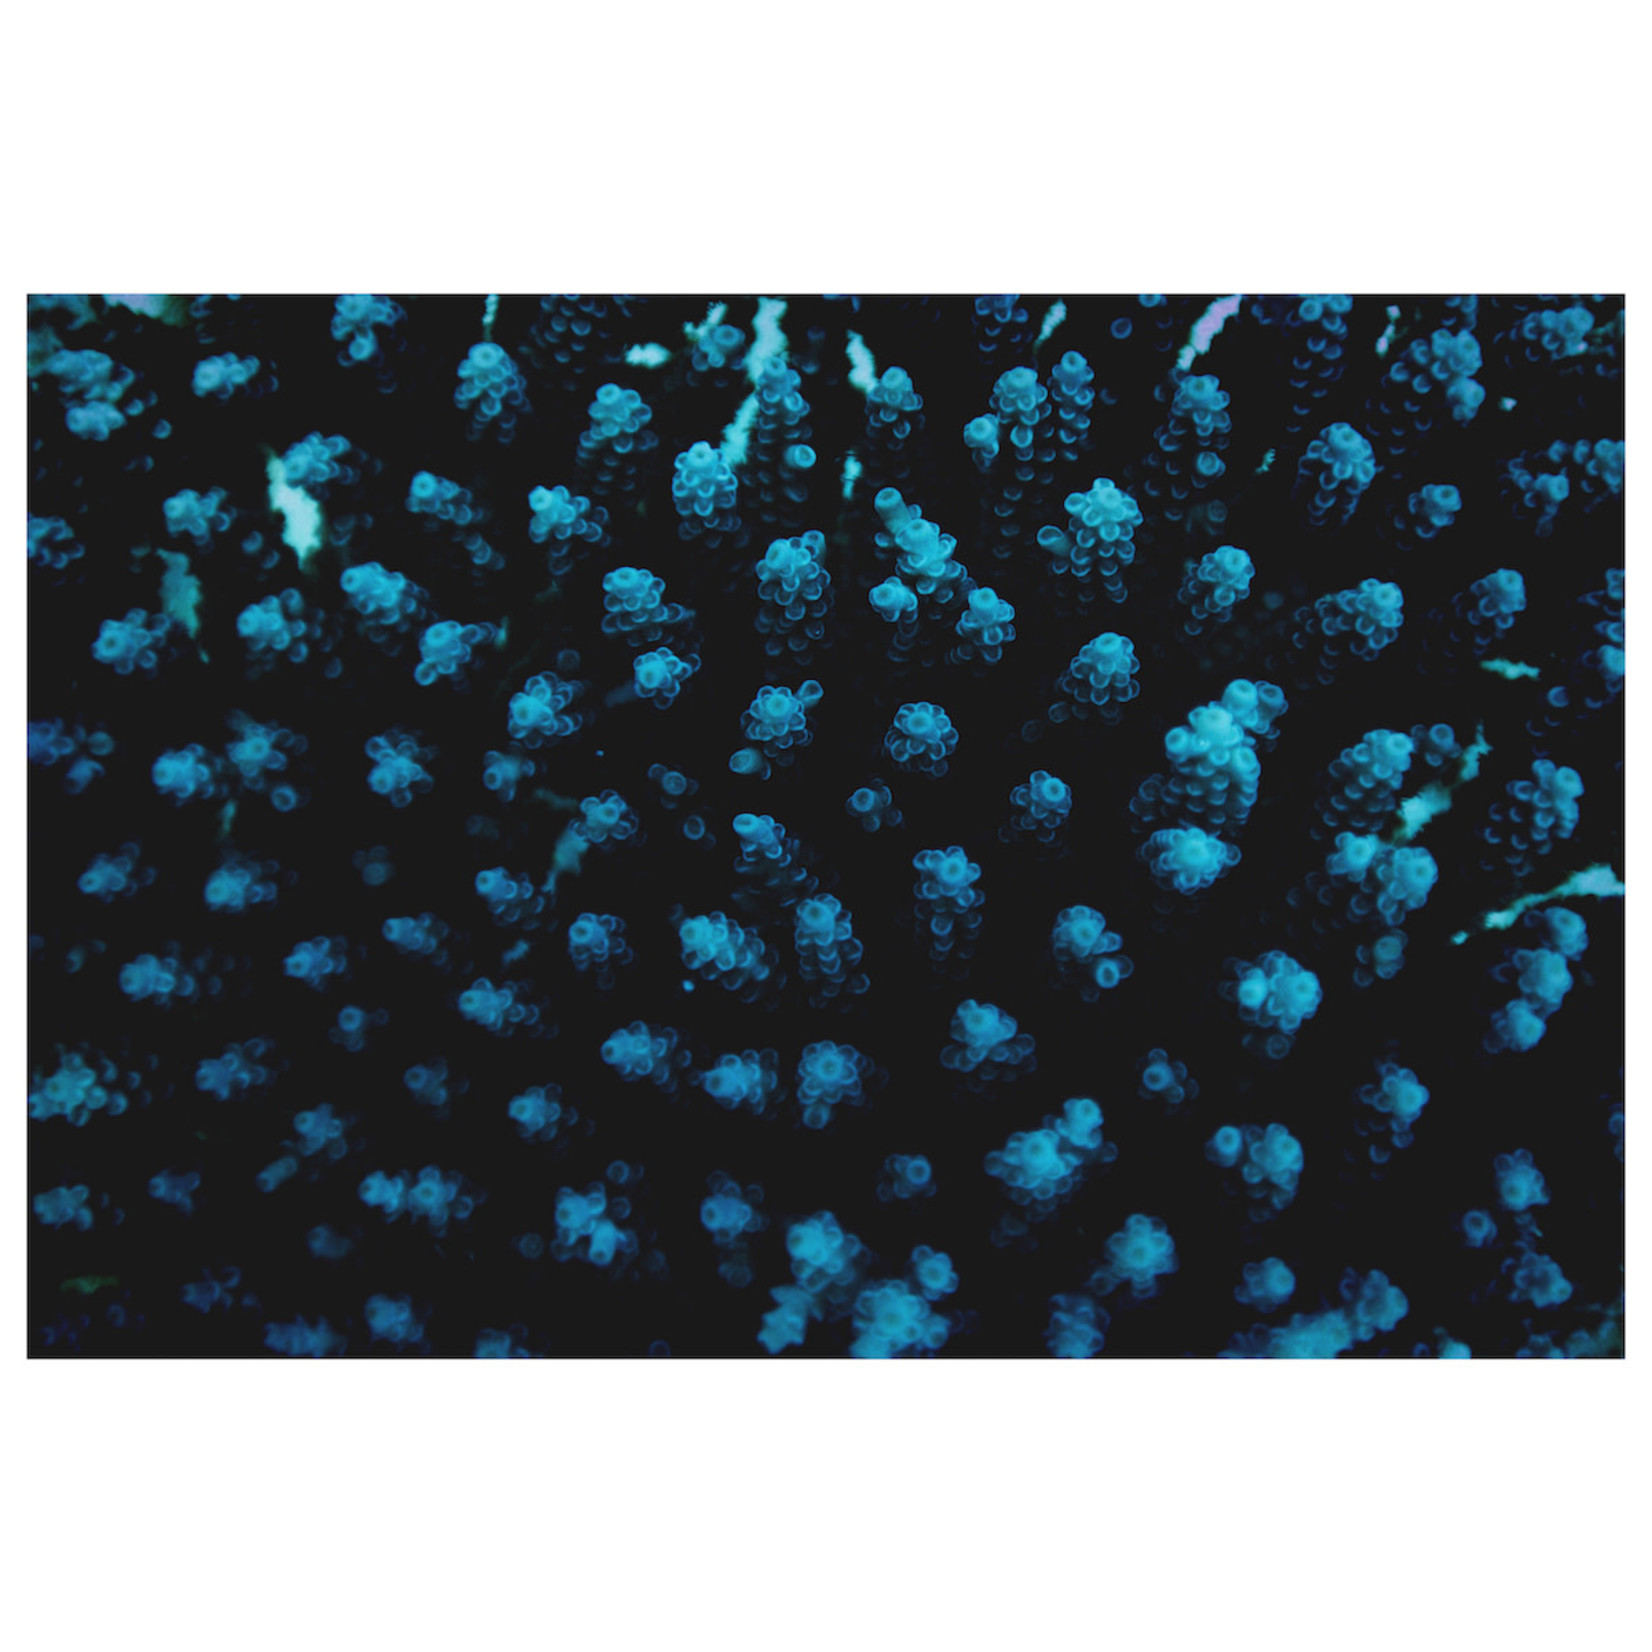 The Picturalist Fine Art Print on Rag Paper: Sea Buds by Enric Gener